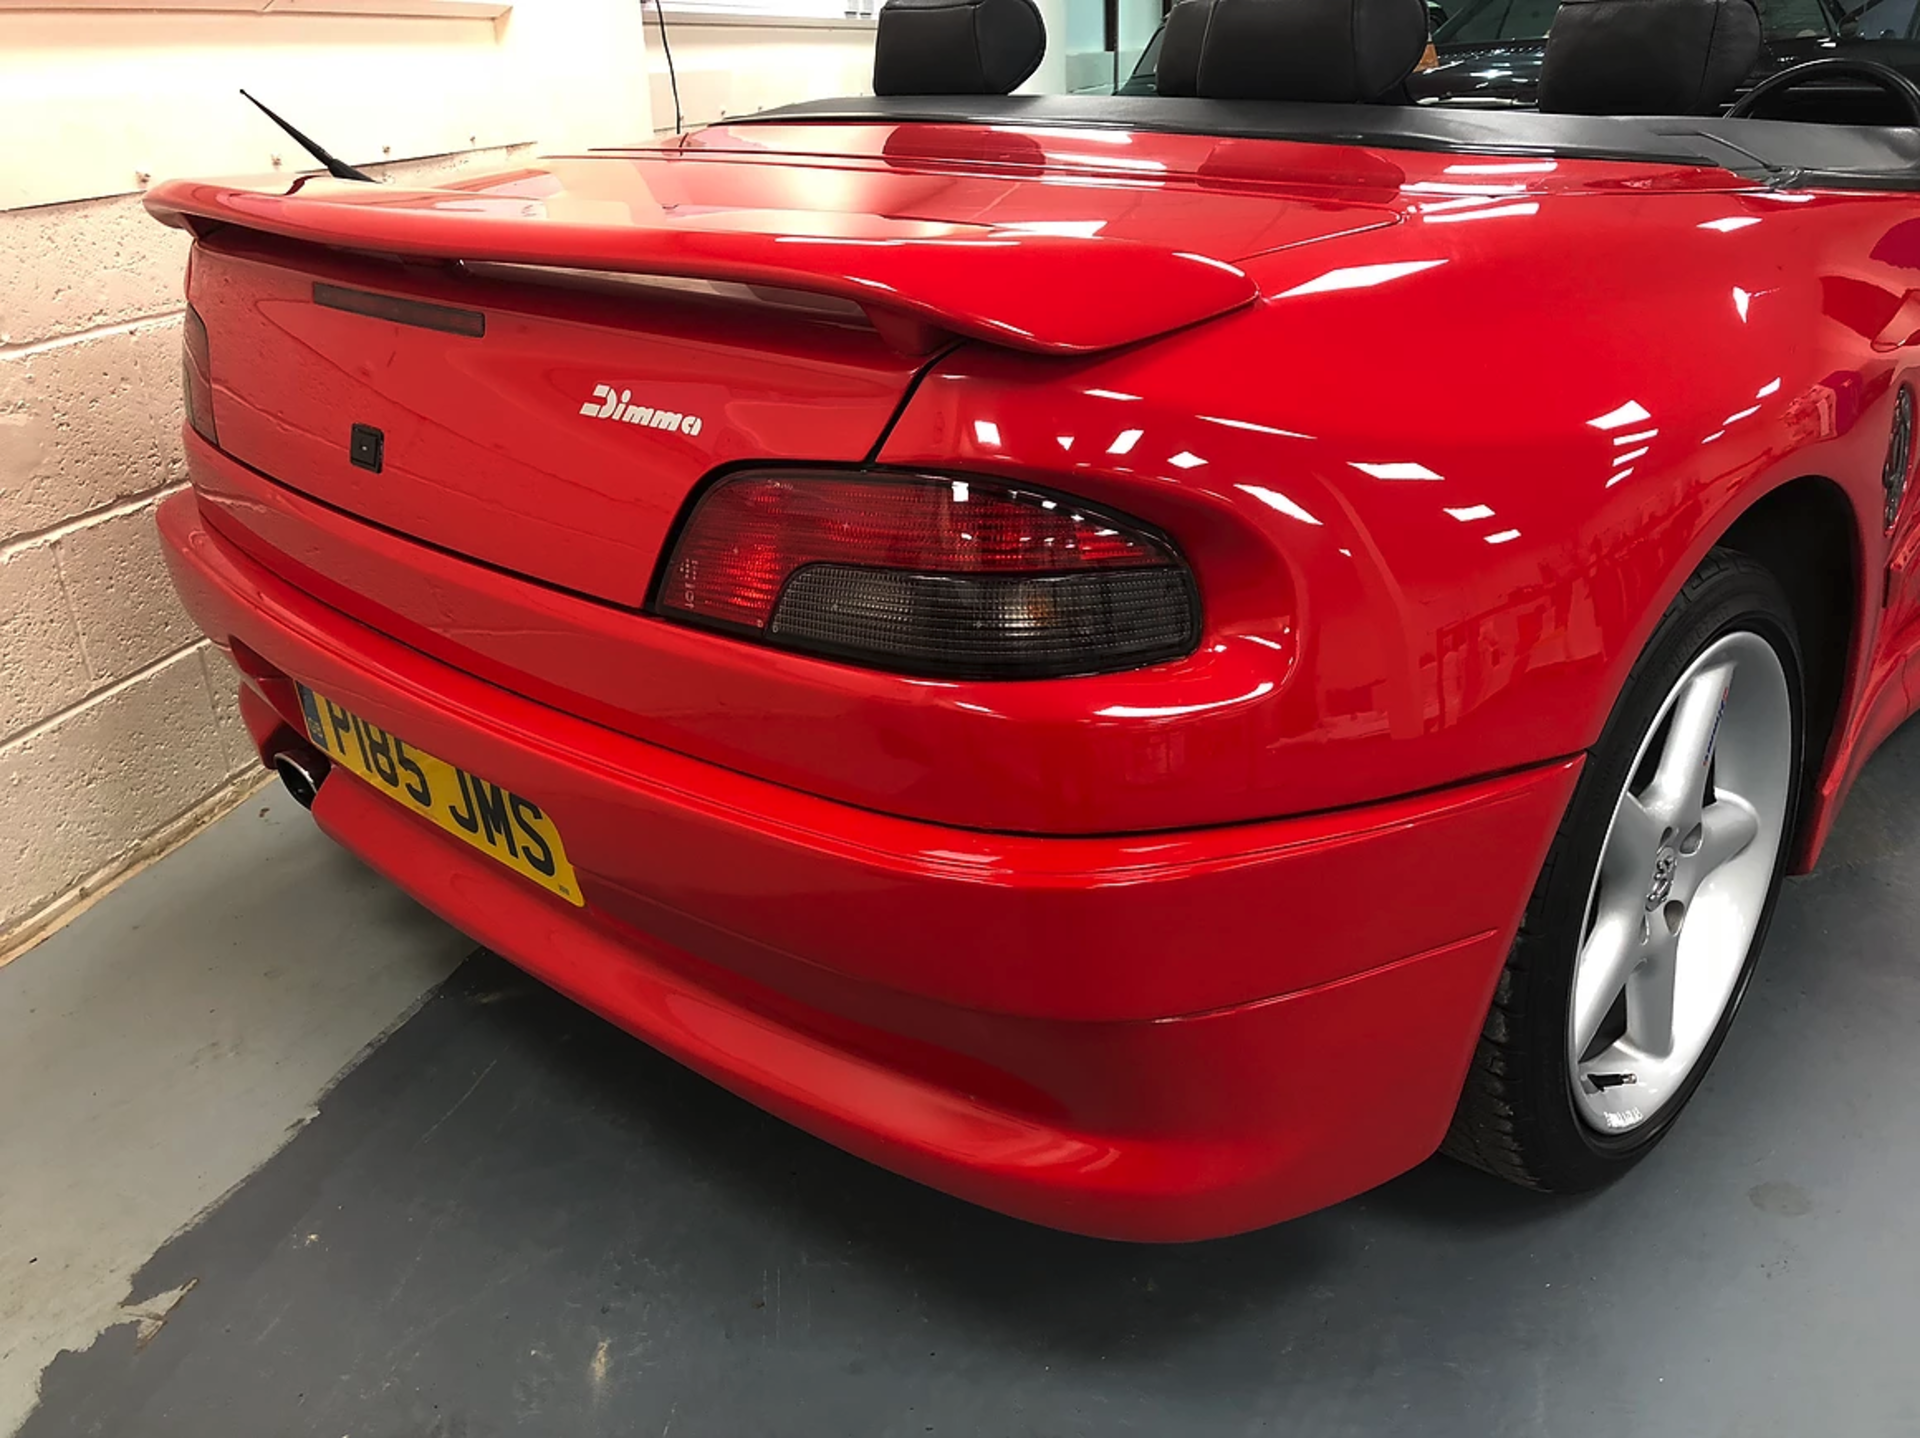 Peugeot 306 2.0i Cabriolet - Dimma prototype. Number 1 of only 2 ever built. - Image 6 of 12